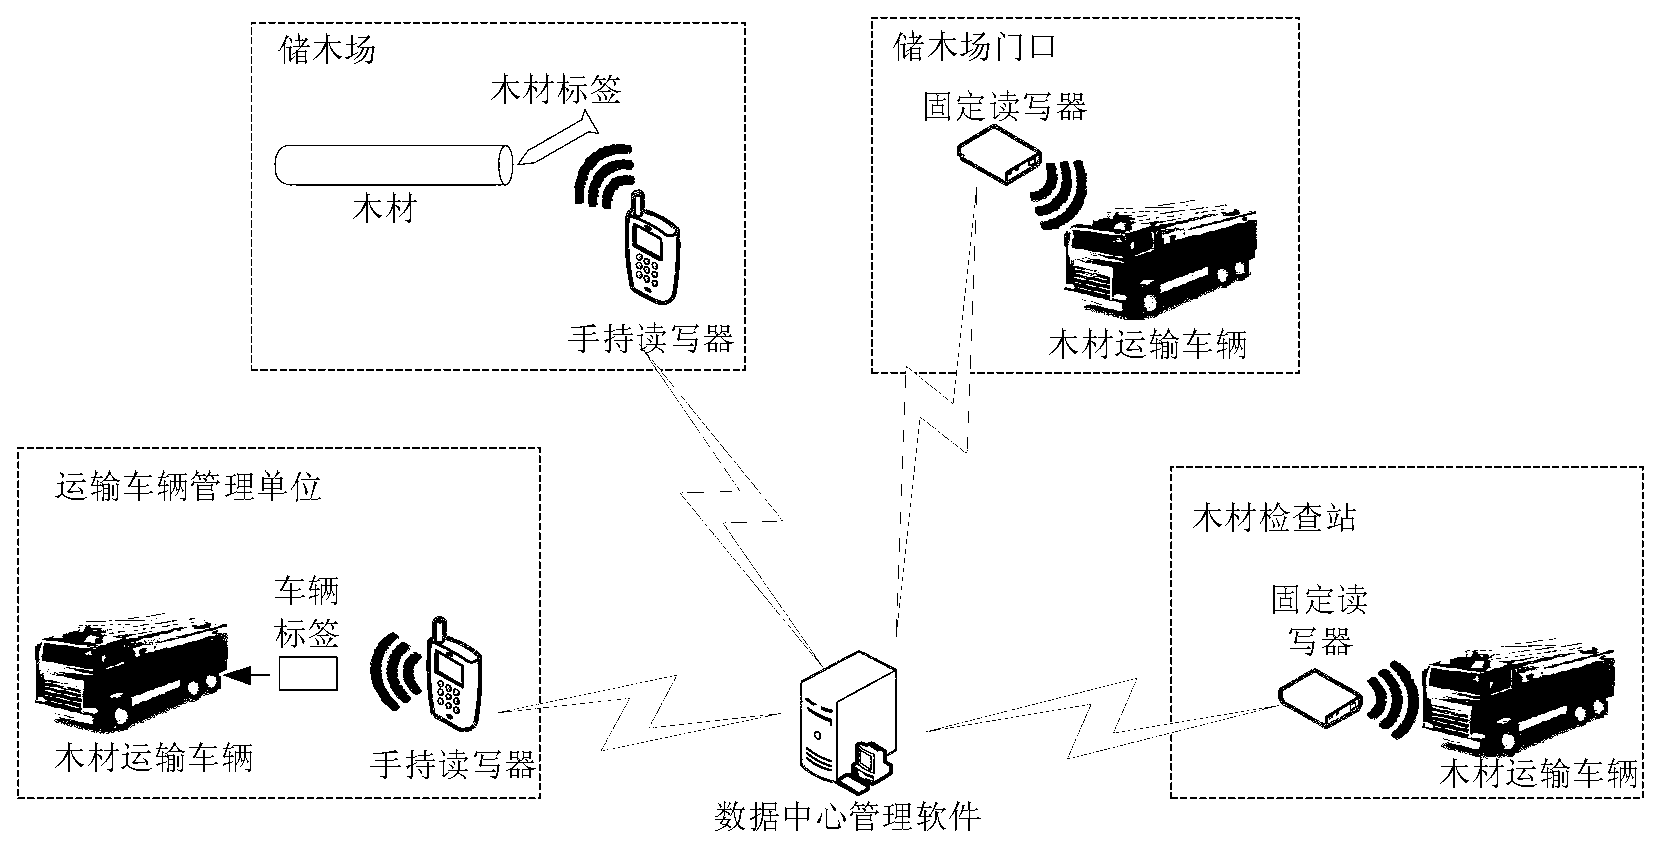 Method and system for good transportation based on radio frequency identification device (RFID)